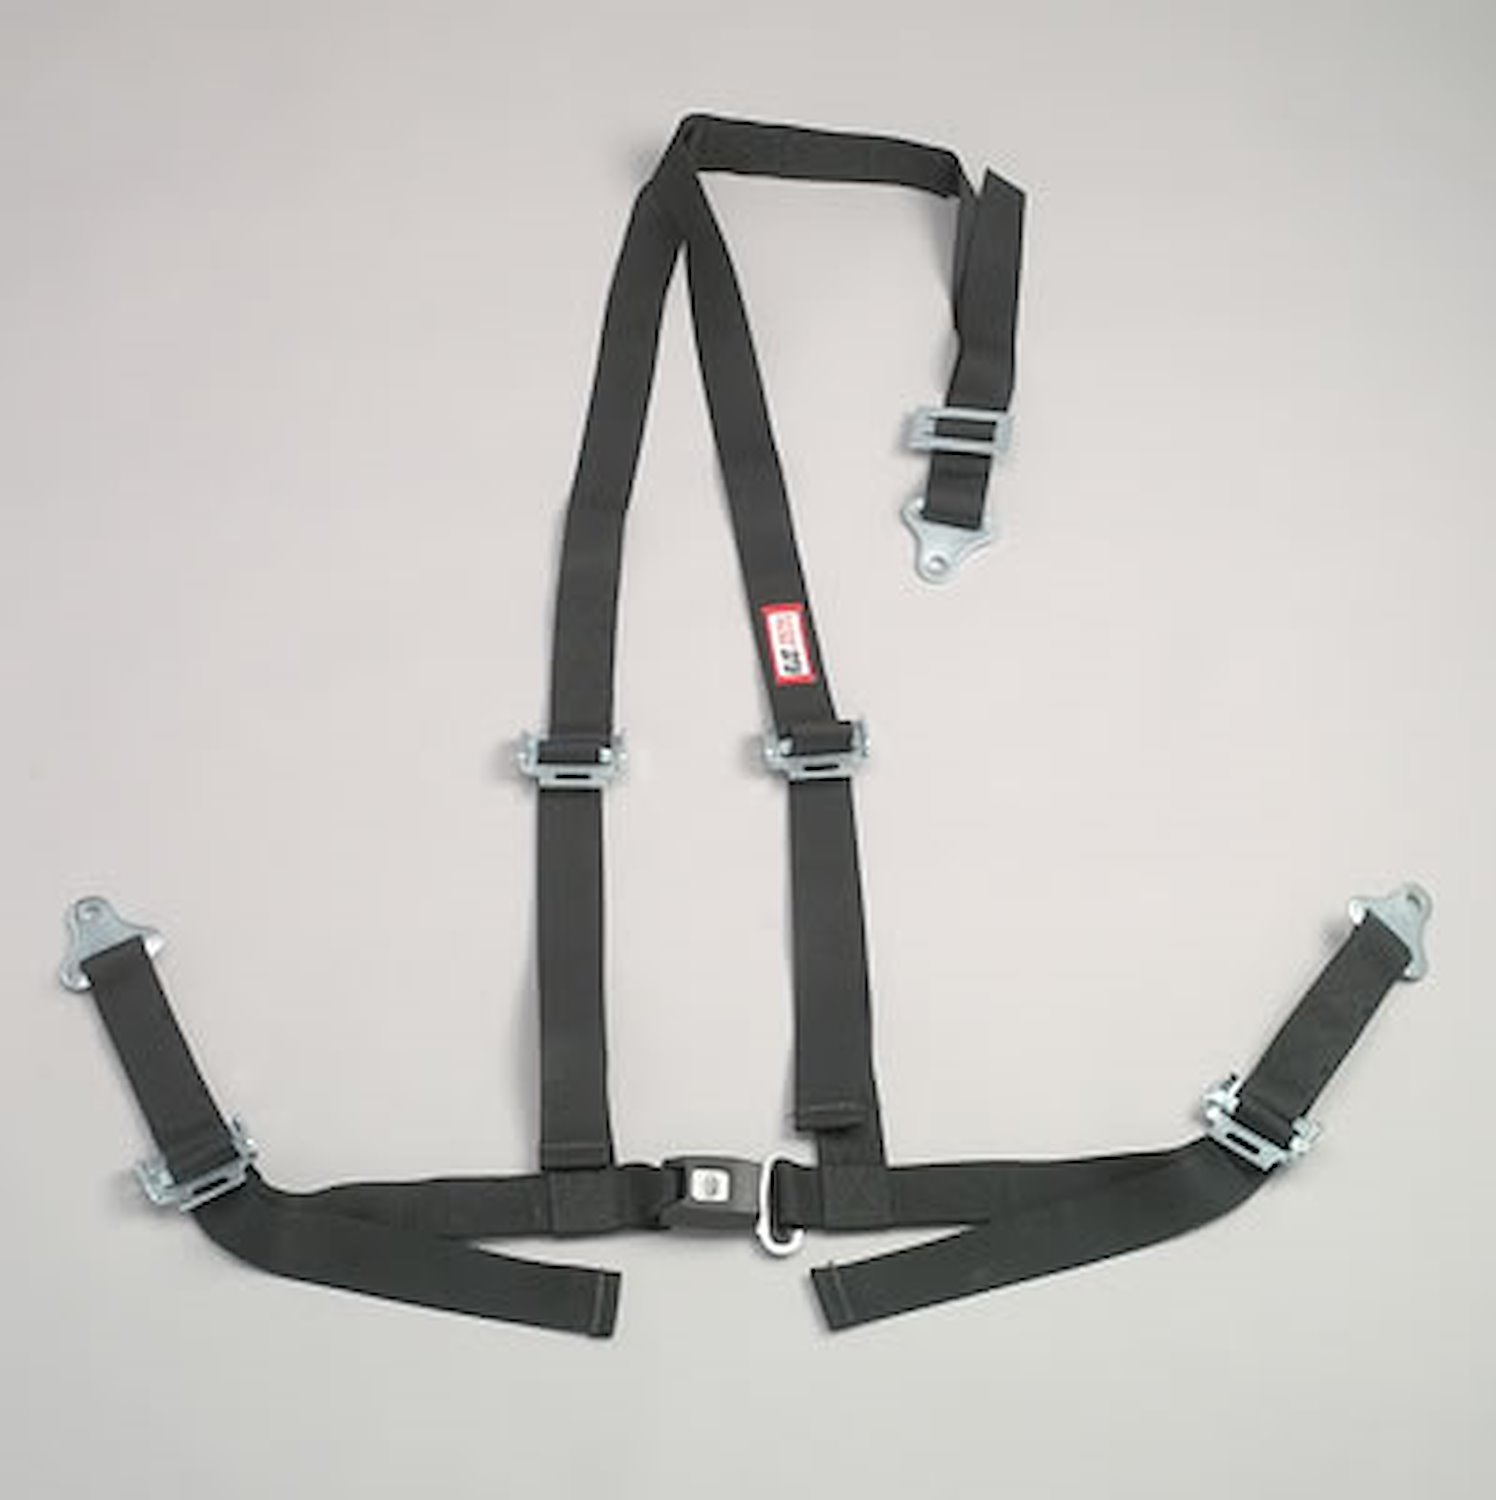 NON-SFI B&T HARNESS 2 PULL UP Lap Belt 2 S. H. V ROLL BAR Mount ALL SNAP ENDS w/STERNUM STRAP ORANGE